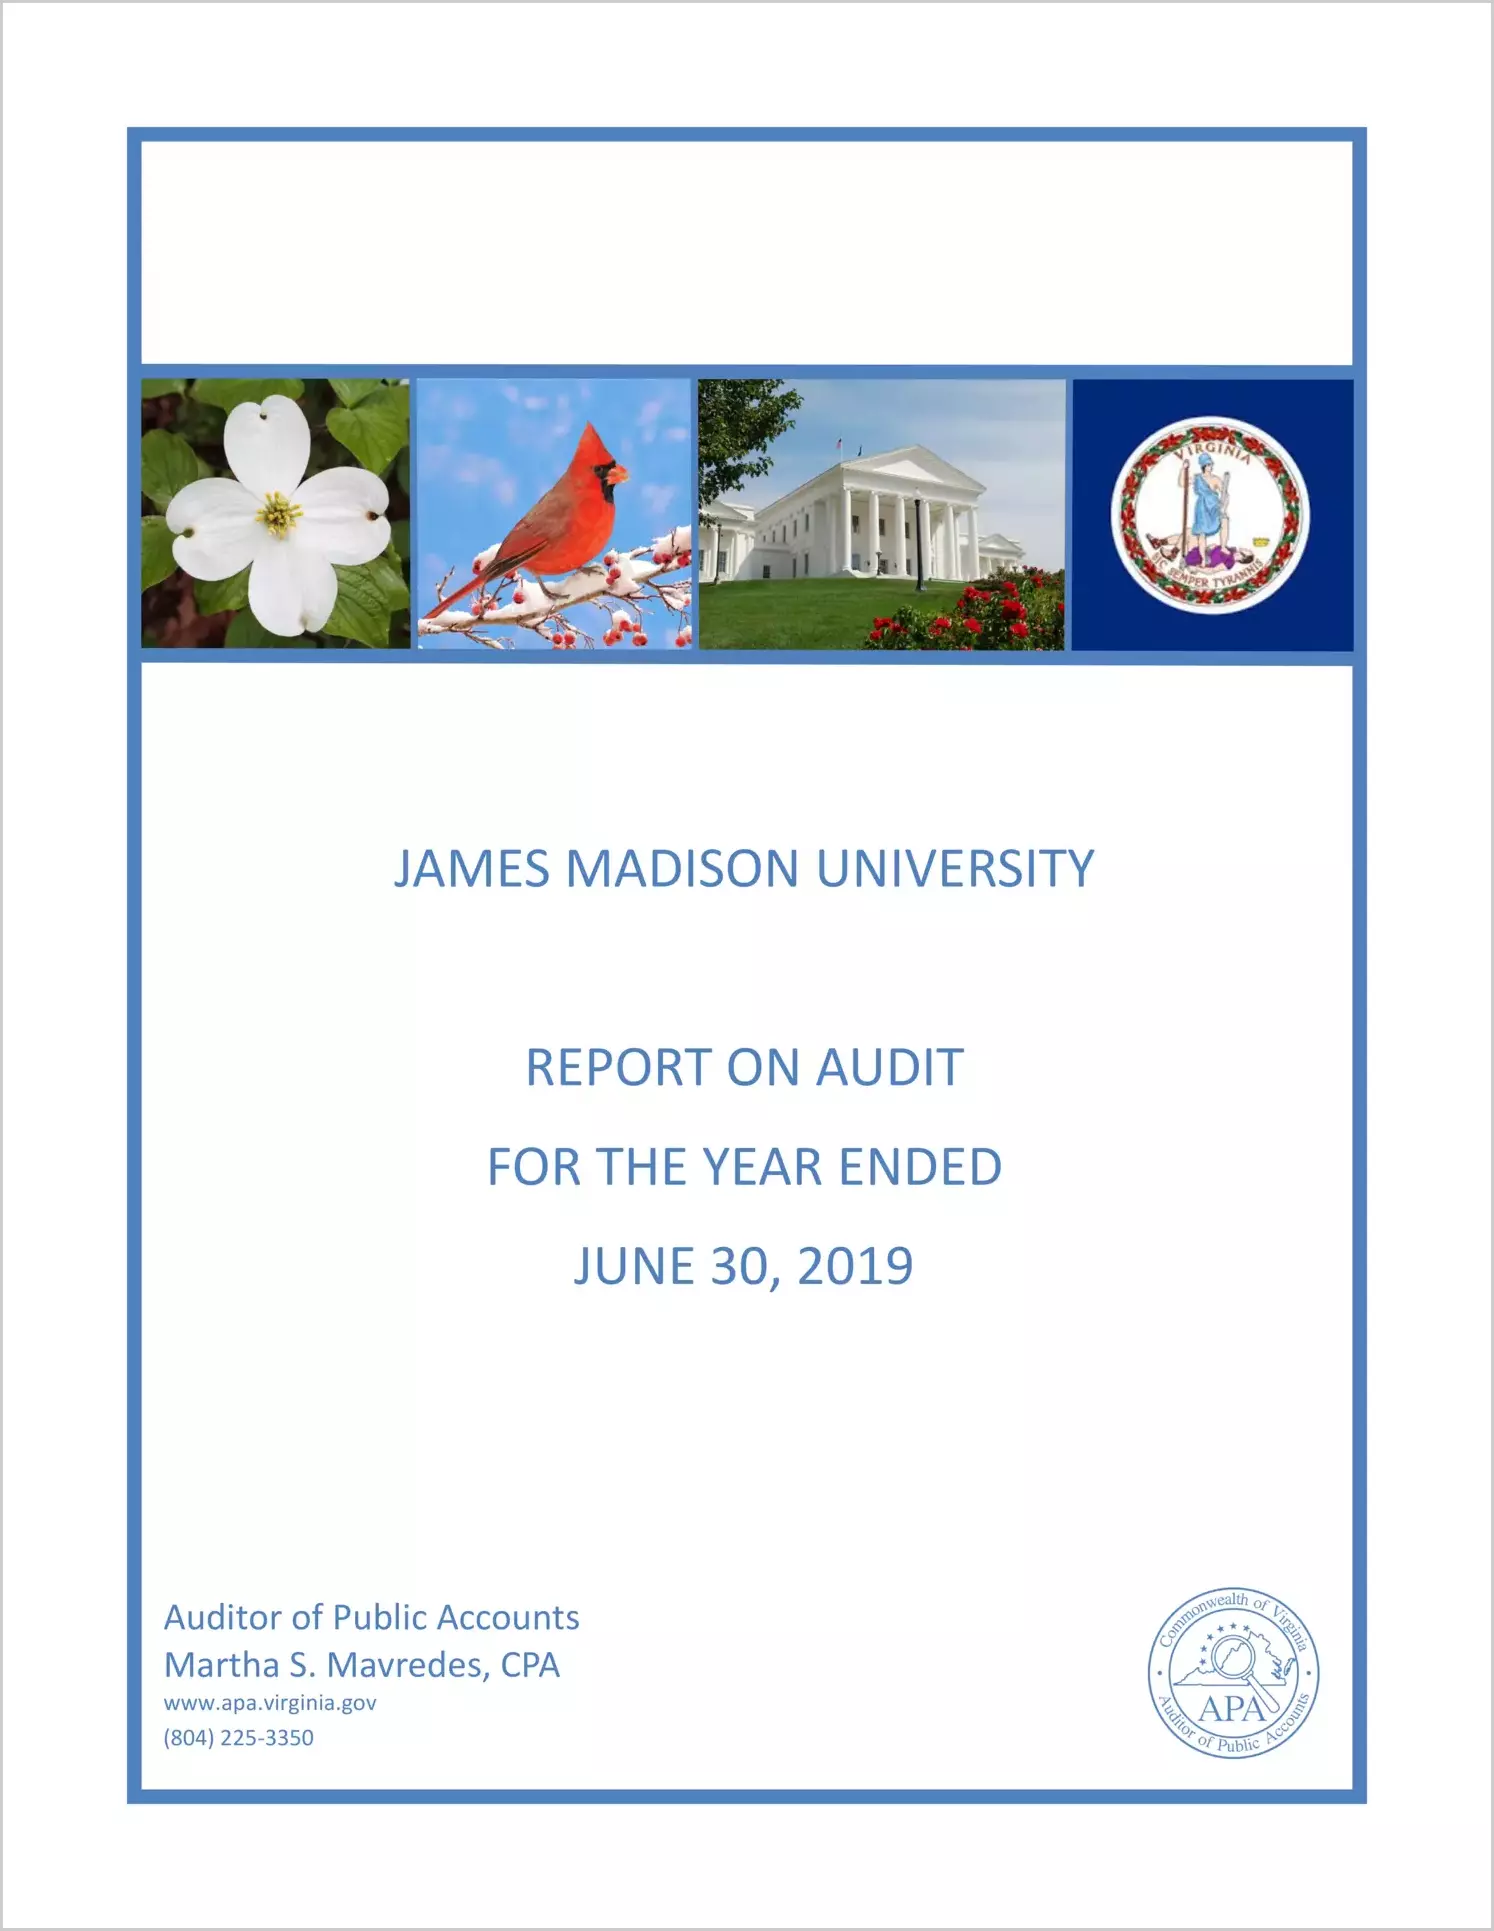 James Madison University for the year ended June 30, 2019